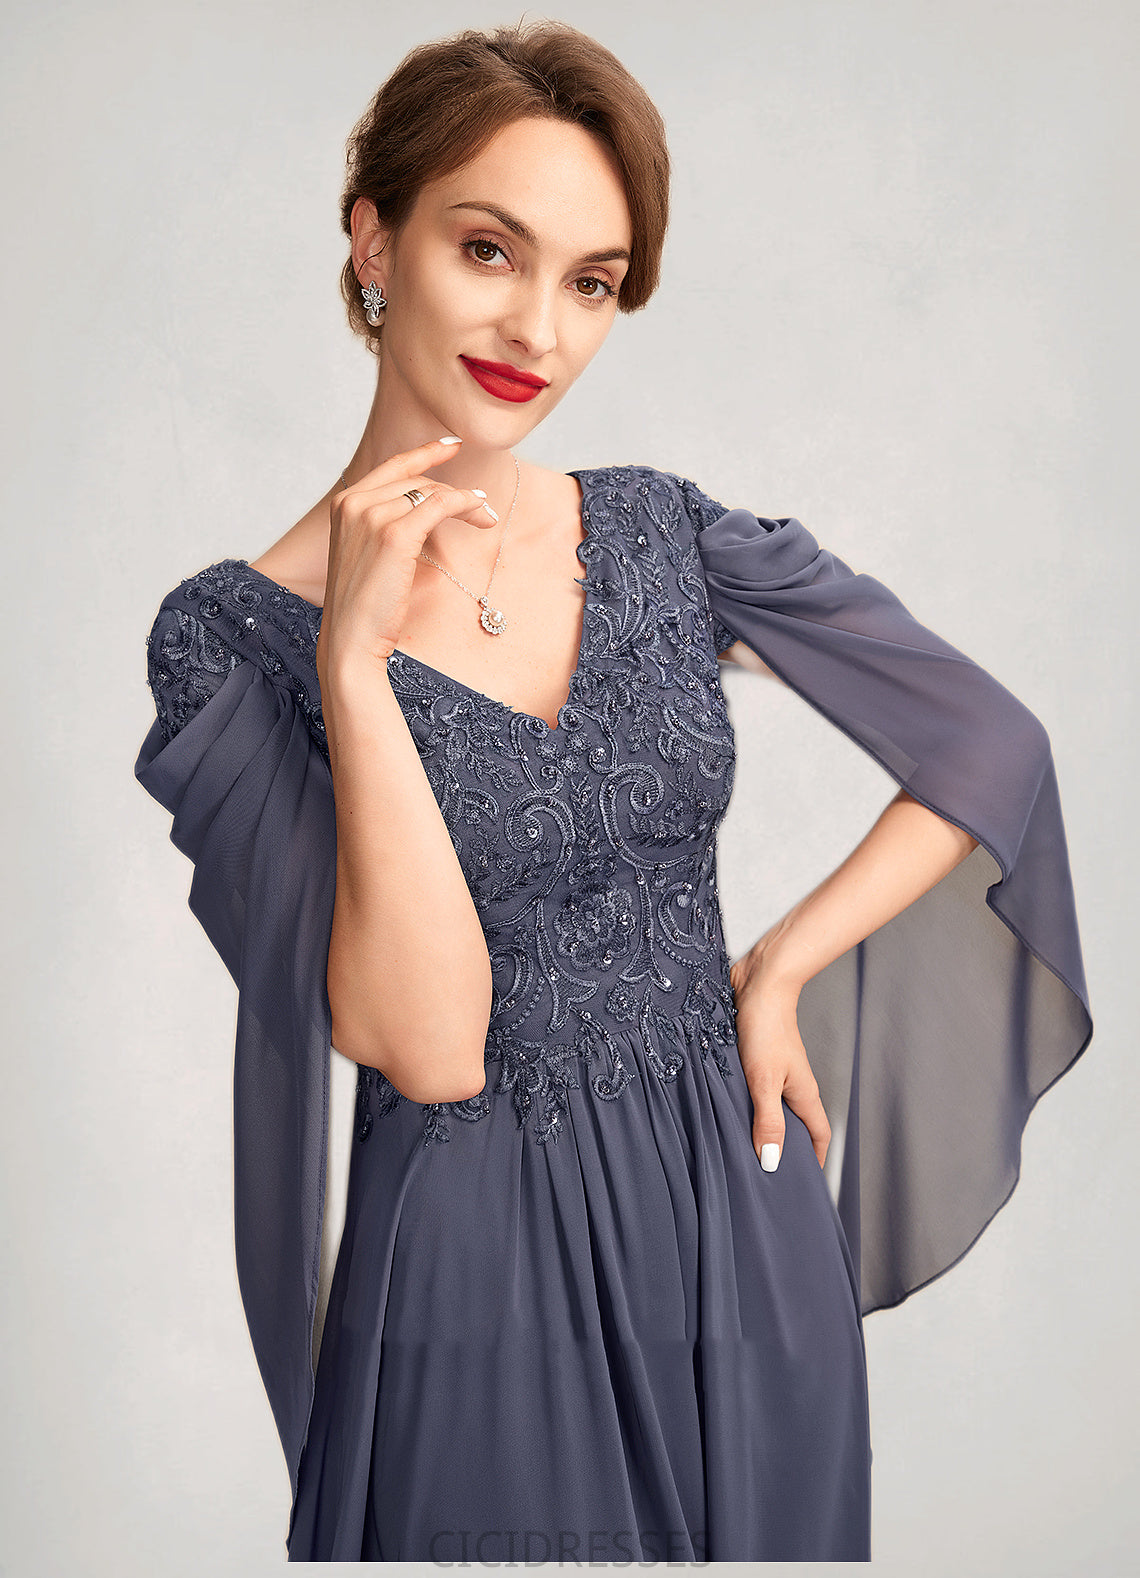 Salome A-Line V-neck Floor-Length Chiffon Lace Mother of the Bride Dress With Beading Sequins CIC8126P0015022